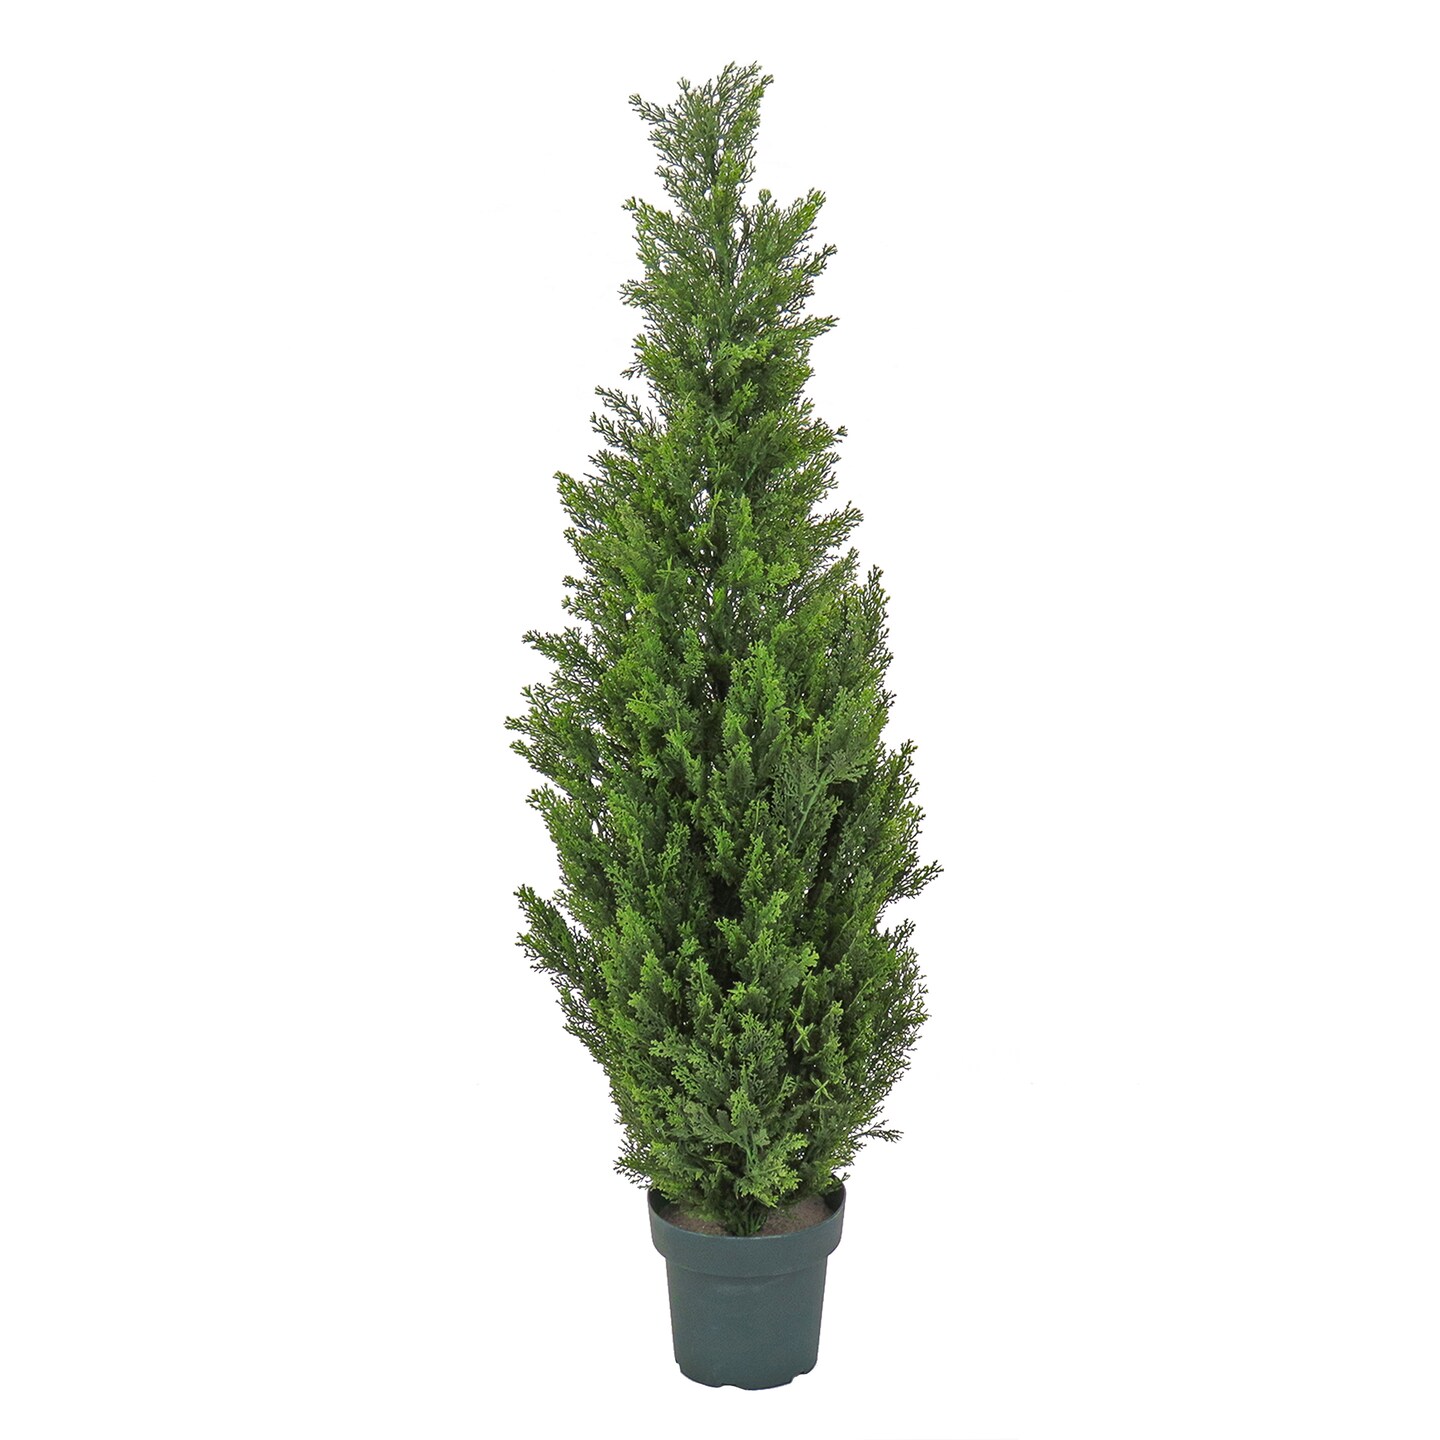 National Tree Company Artificial Tree Decoration, Cedar, Includes Green Pot Base, Spring Collection, 50 Inches